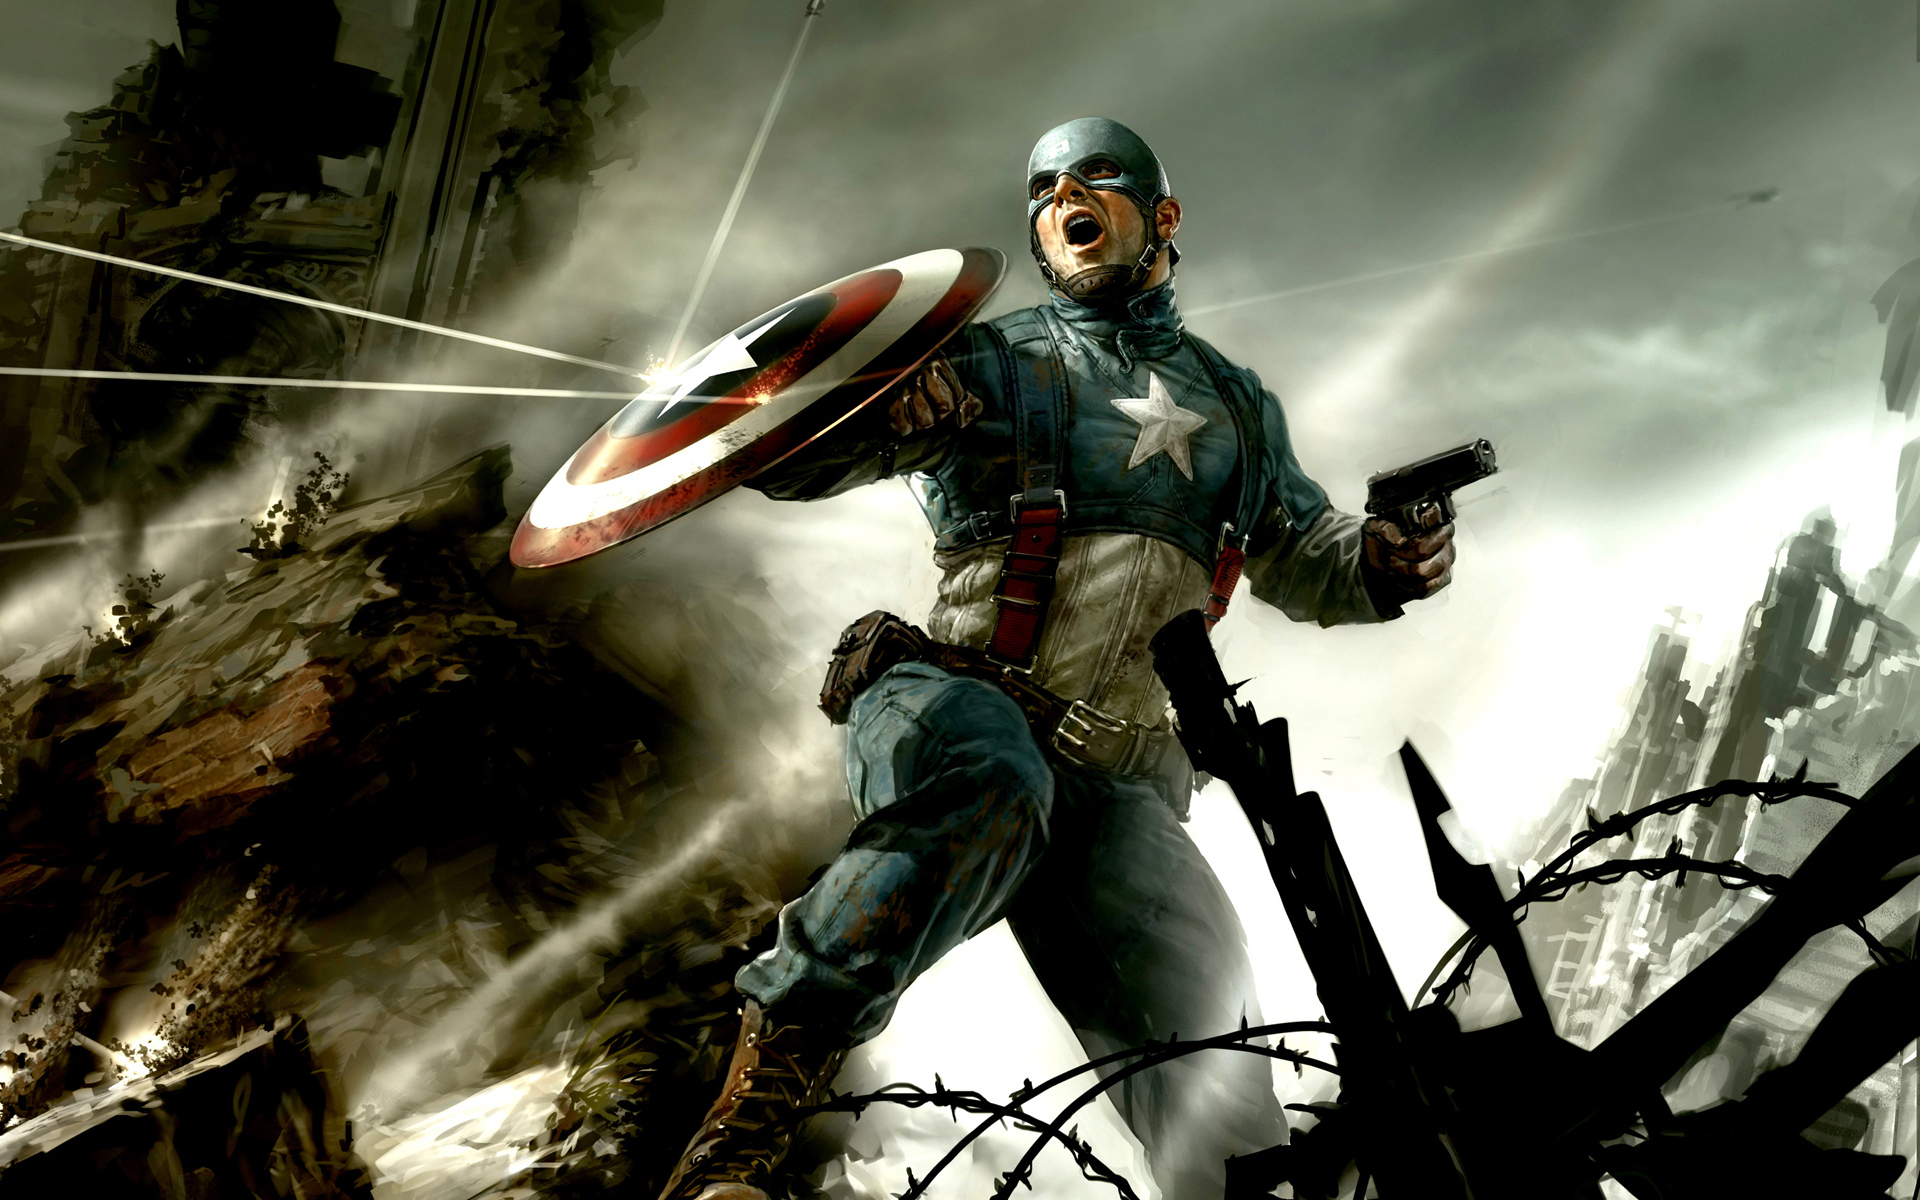 Captain America CG Wallpapers HD Wallpapers 1920x1200